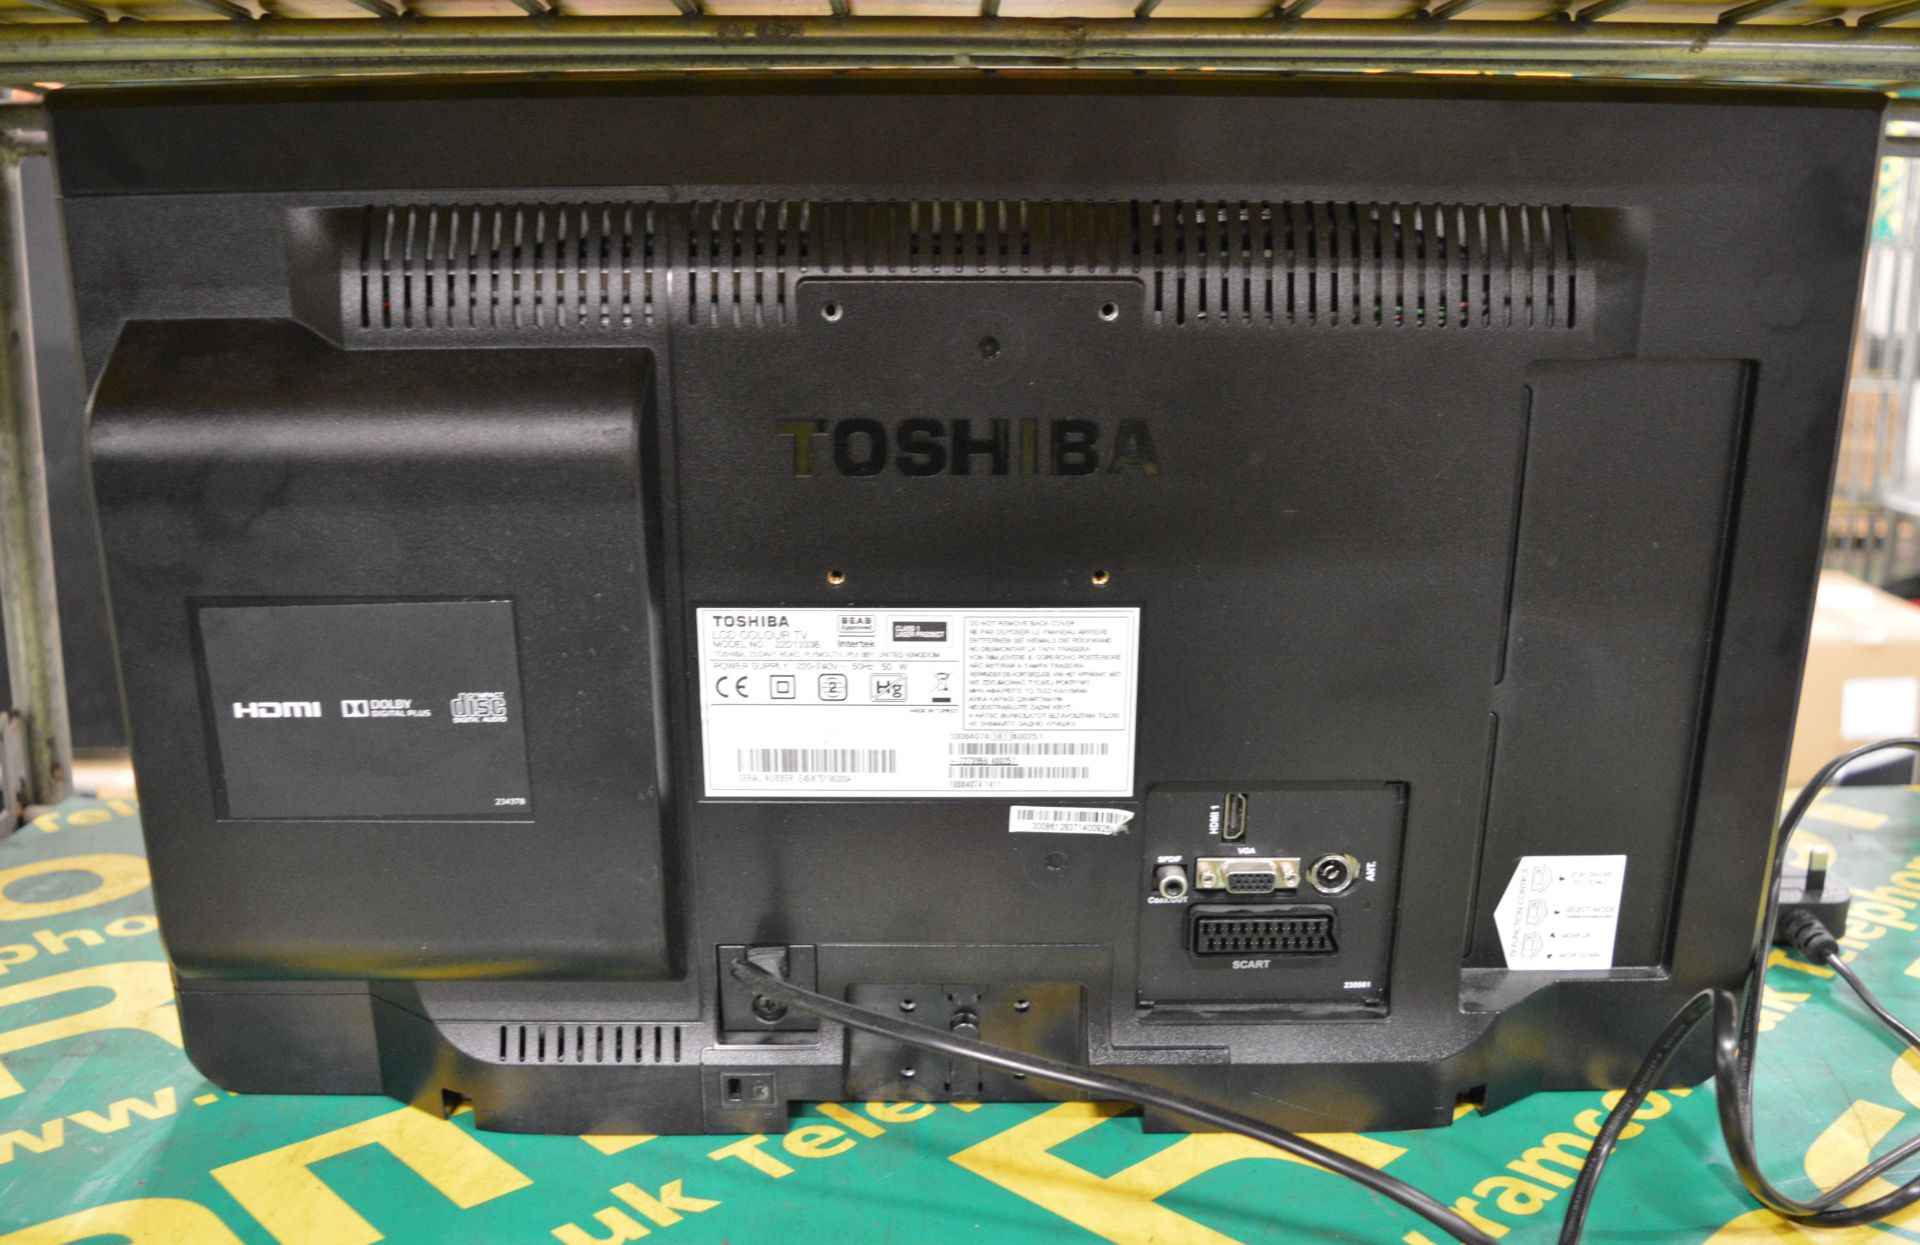 Toshiba 22D1333B Monitor serial E45W75Y96 300A1 - no stand - Image 2 of 2